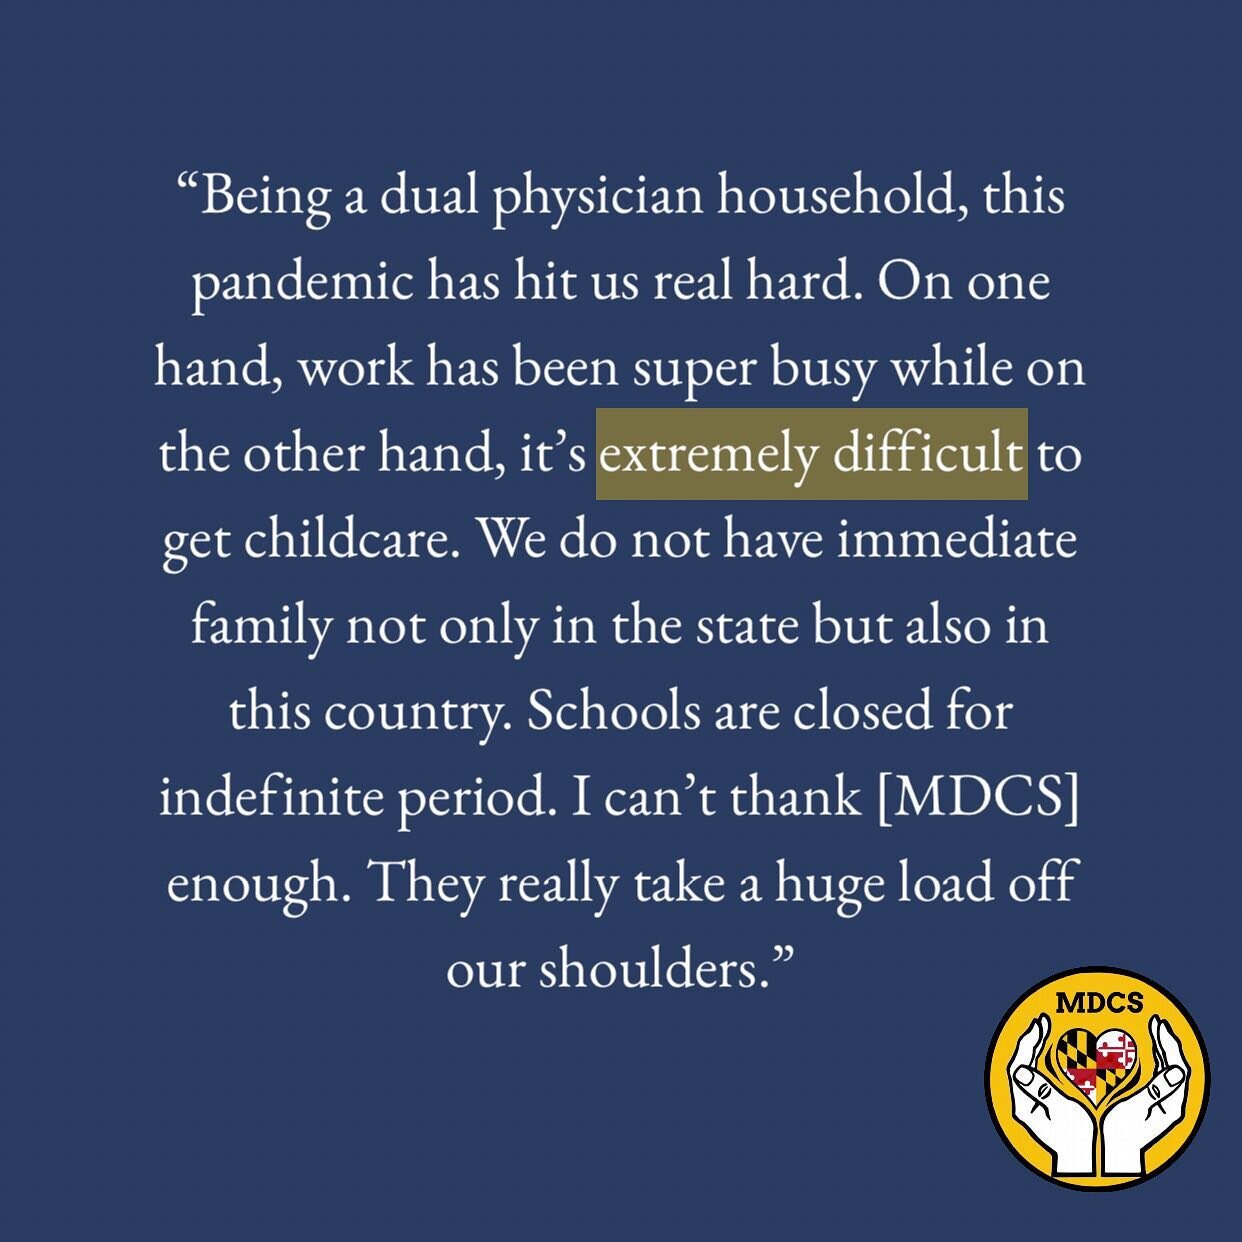 Happy healthcare worker of the week!This is our favorite part of the process; learning and hearing from frontline workers. It&rsquo;s messages like these that inspire us daily.

If you&rsquo;re an essential worker in need of assistance with childcare